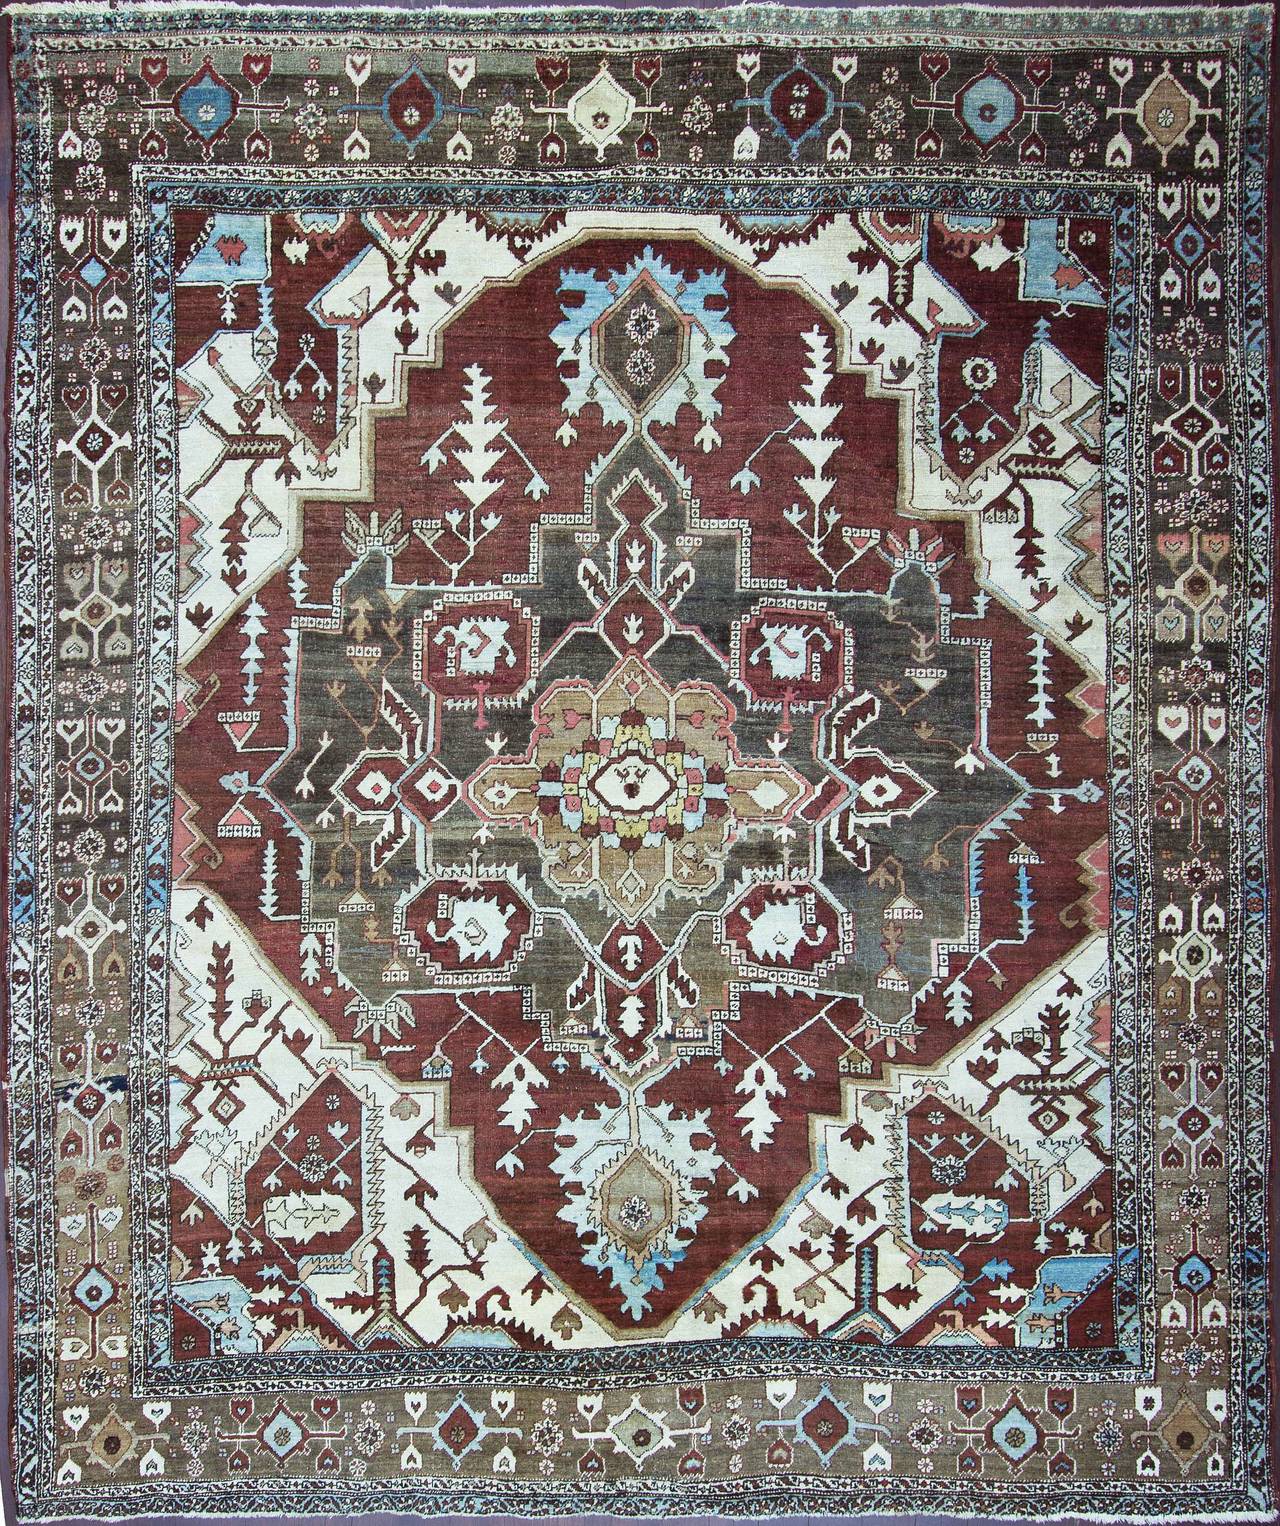 Serapi rug could be also Bakshaish because of his motifs like birds in the center medallion and combination of colors, Primitive design and weave. The beautiful design of birds and their egg inside of the nest. Decorated with traditional patterns